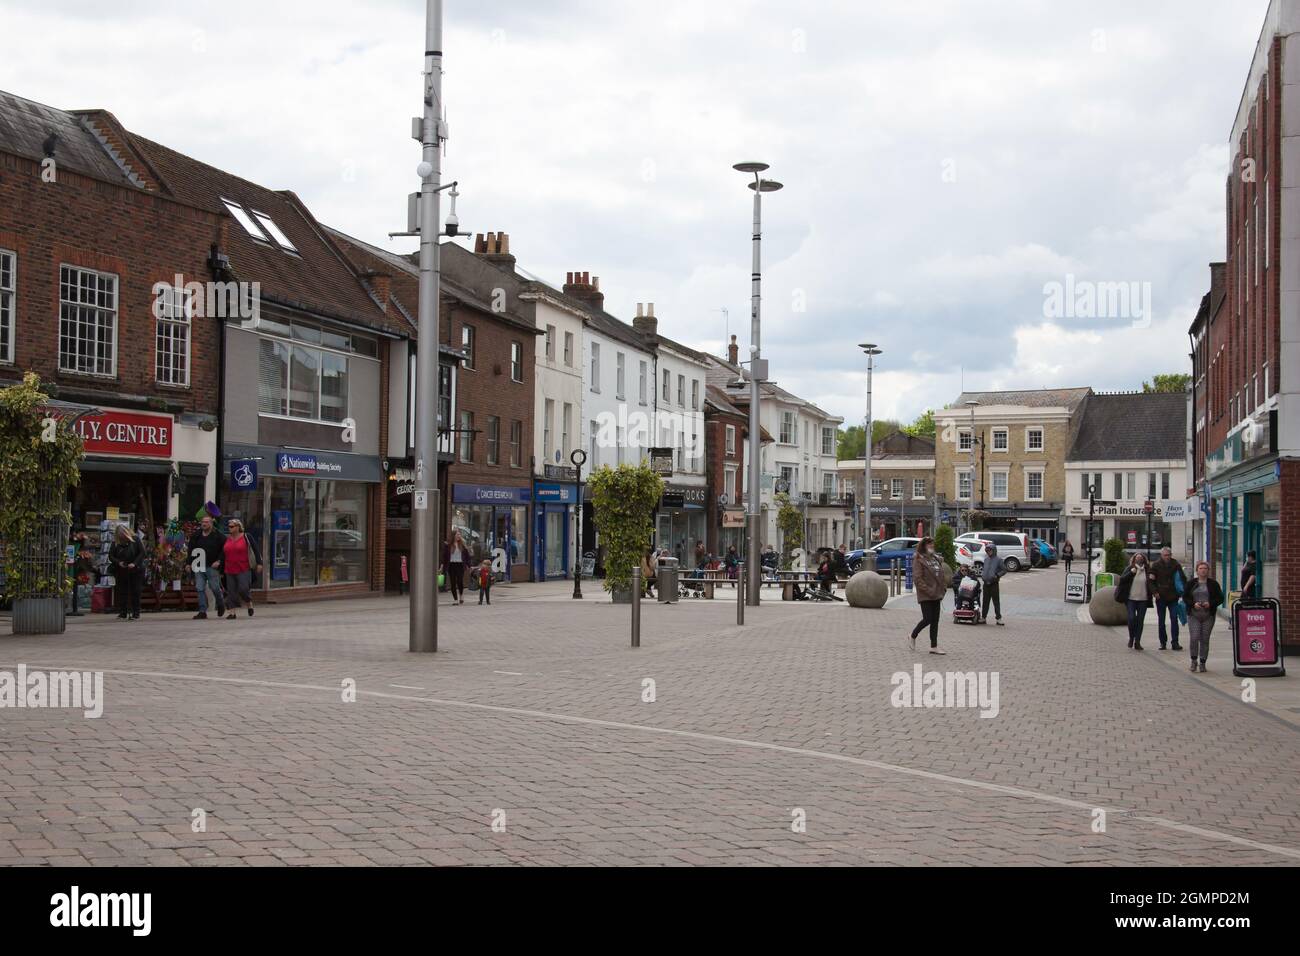 The shopping precinct in Andover, Hampshire in the UK Stock Photo